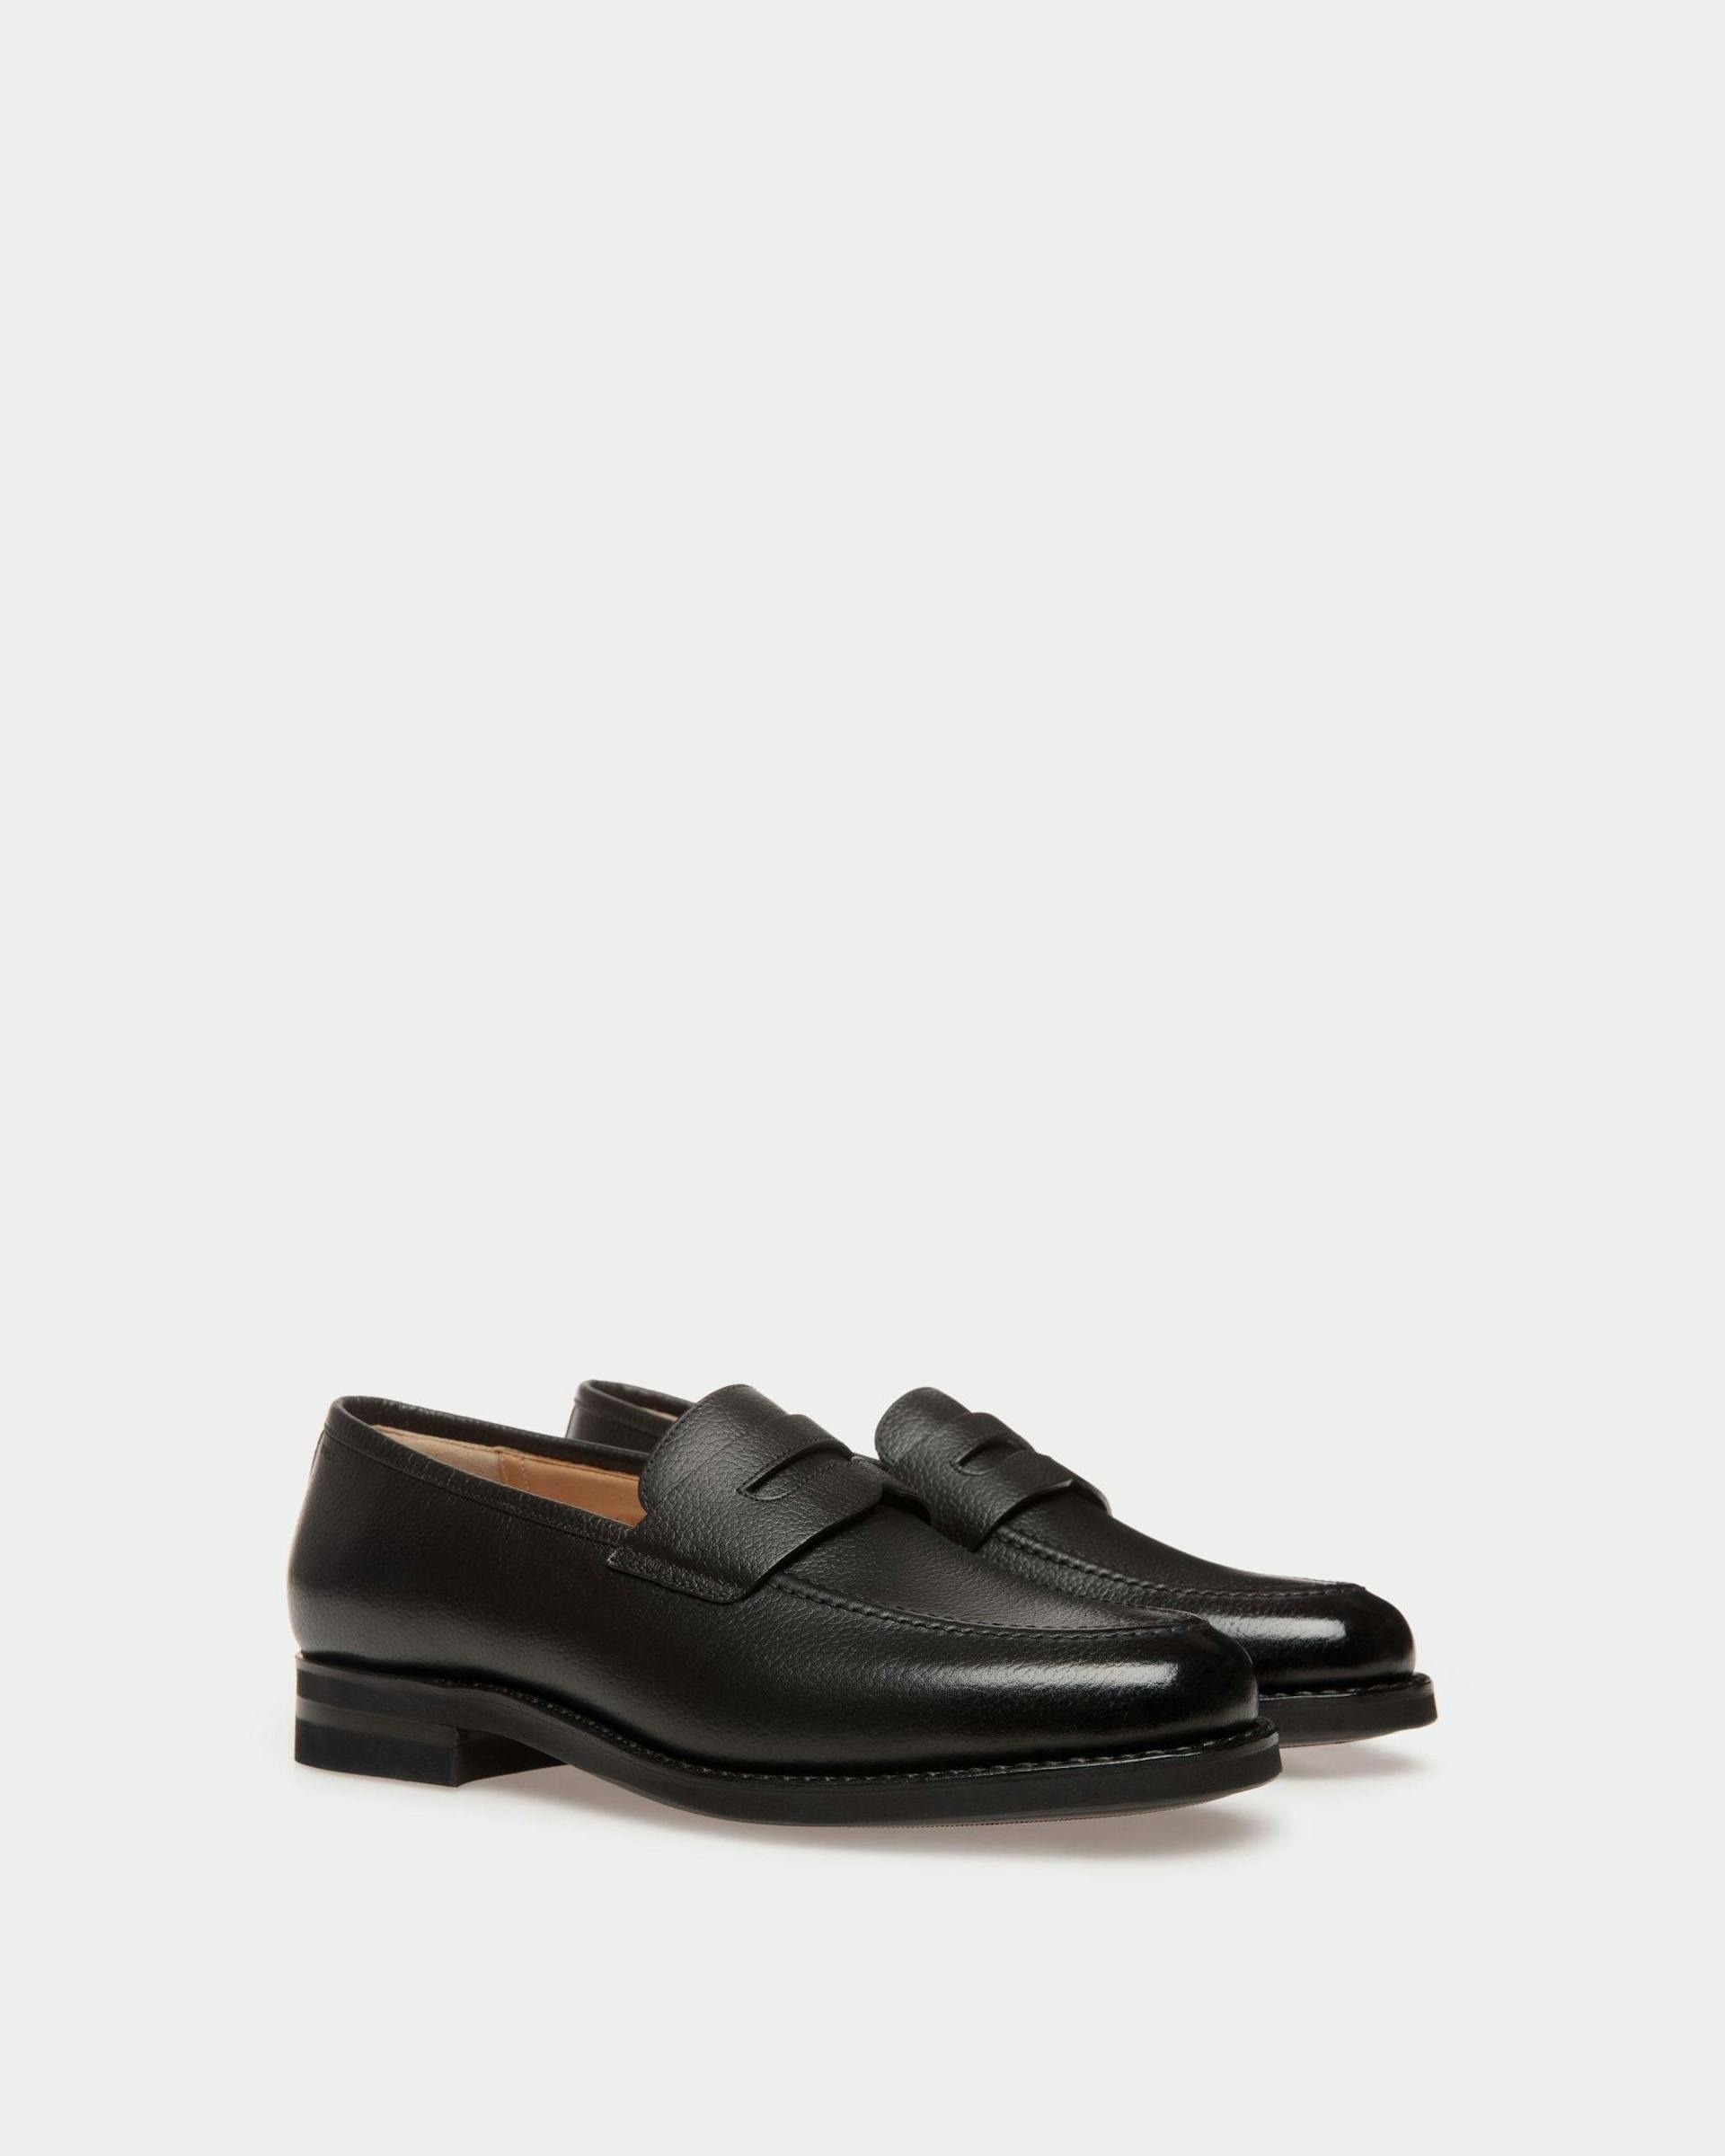 Men's Schoenen Loafer in Embossed Leather | Bally | Still Life 3/4 Front